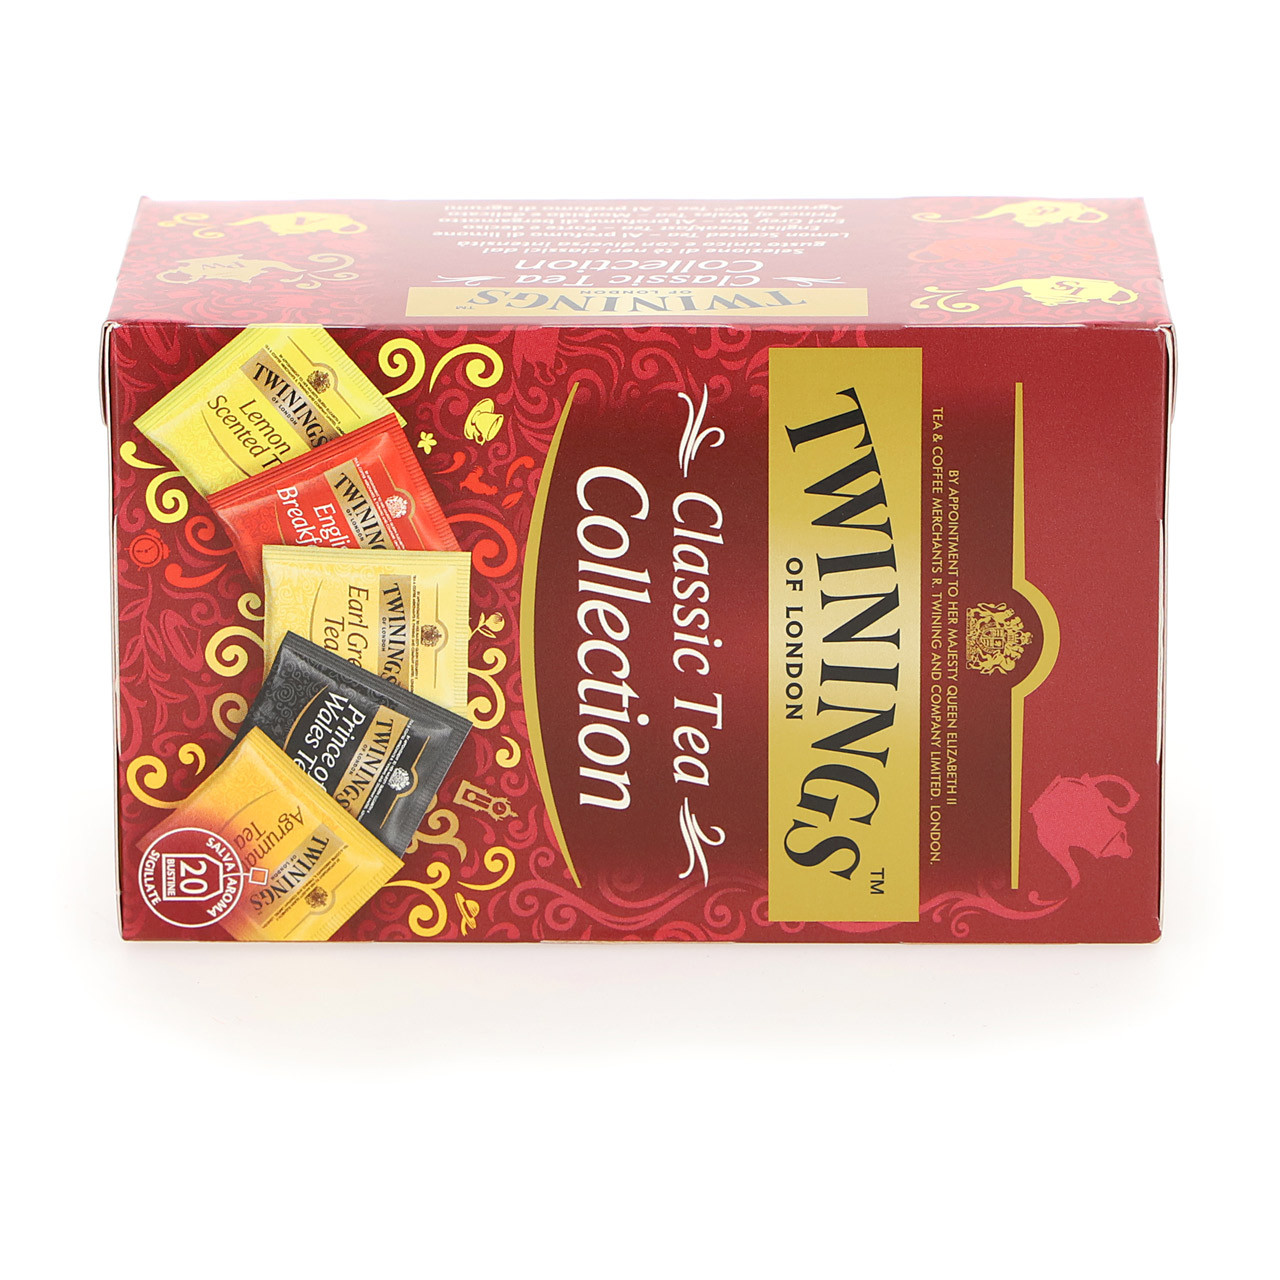 Twinings Classic Tea 20ff x8 Collection